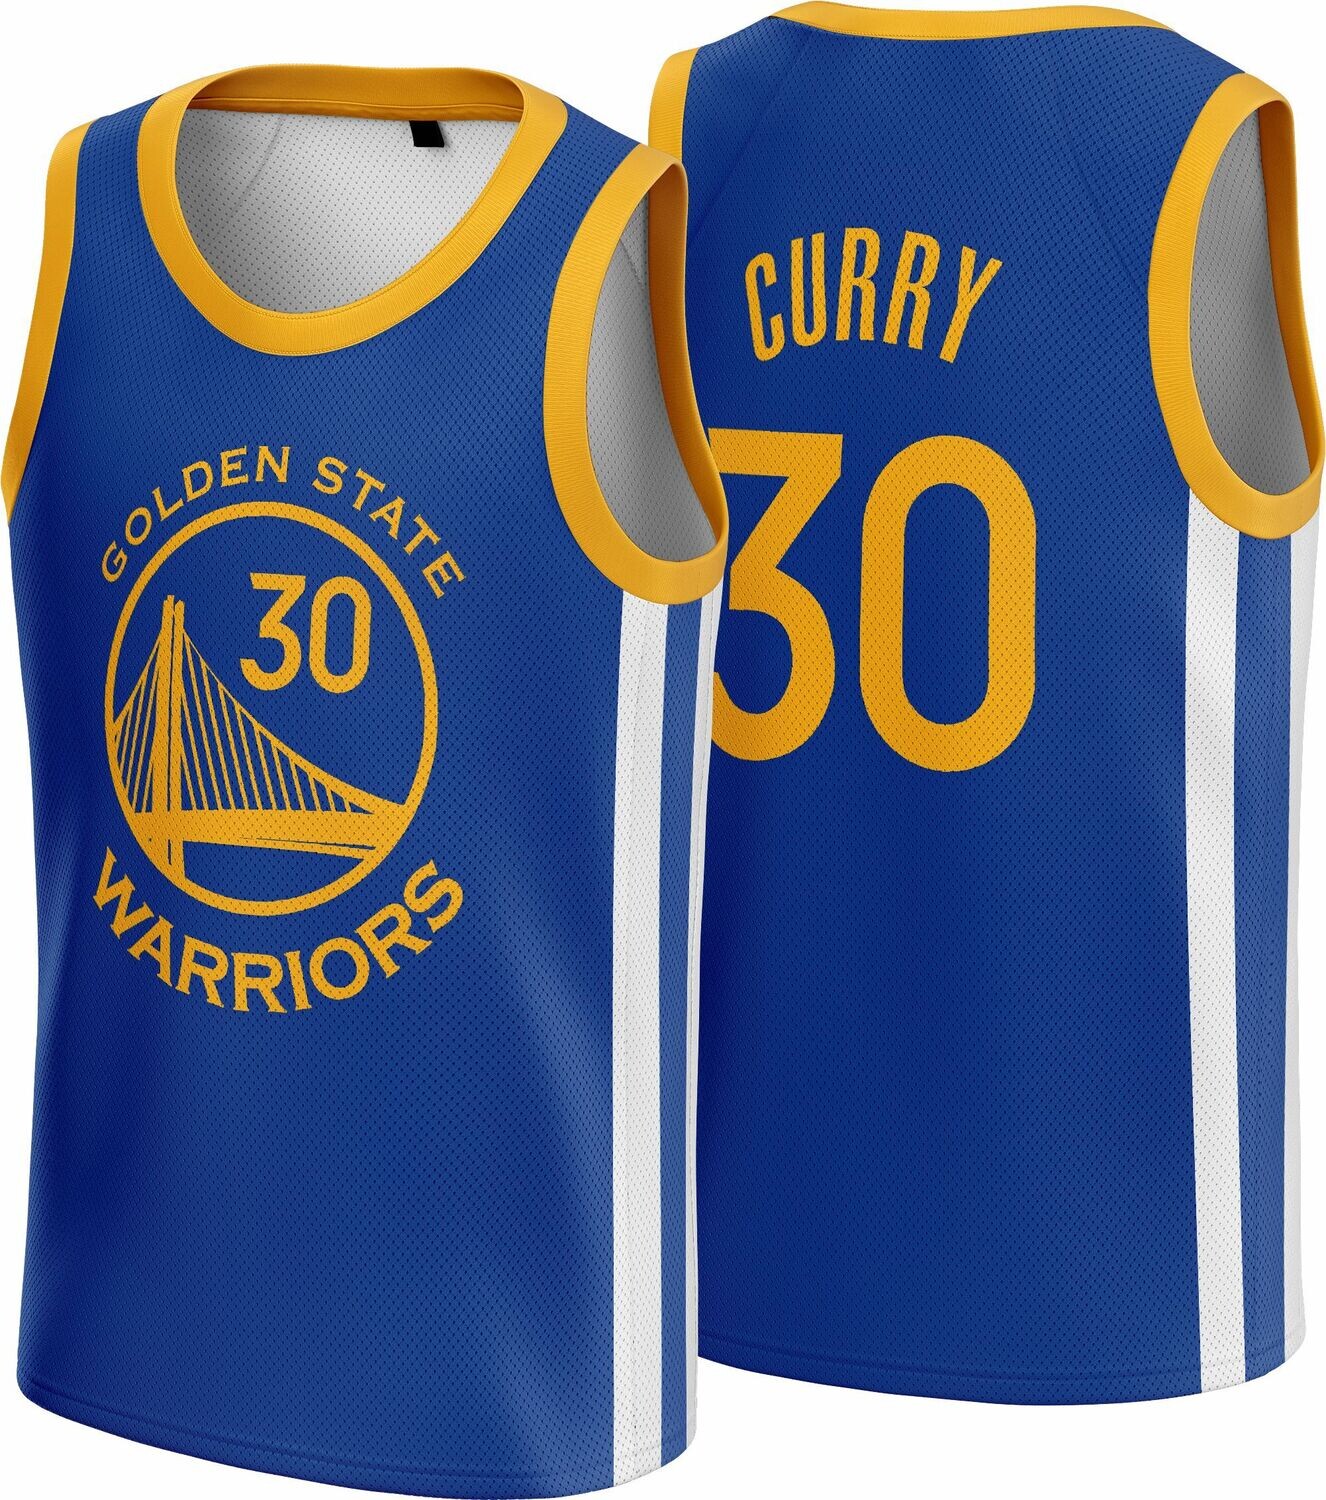 Steph Curry blue Jersey - Welcome to our Store - Oncourt Basketball